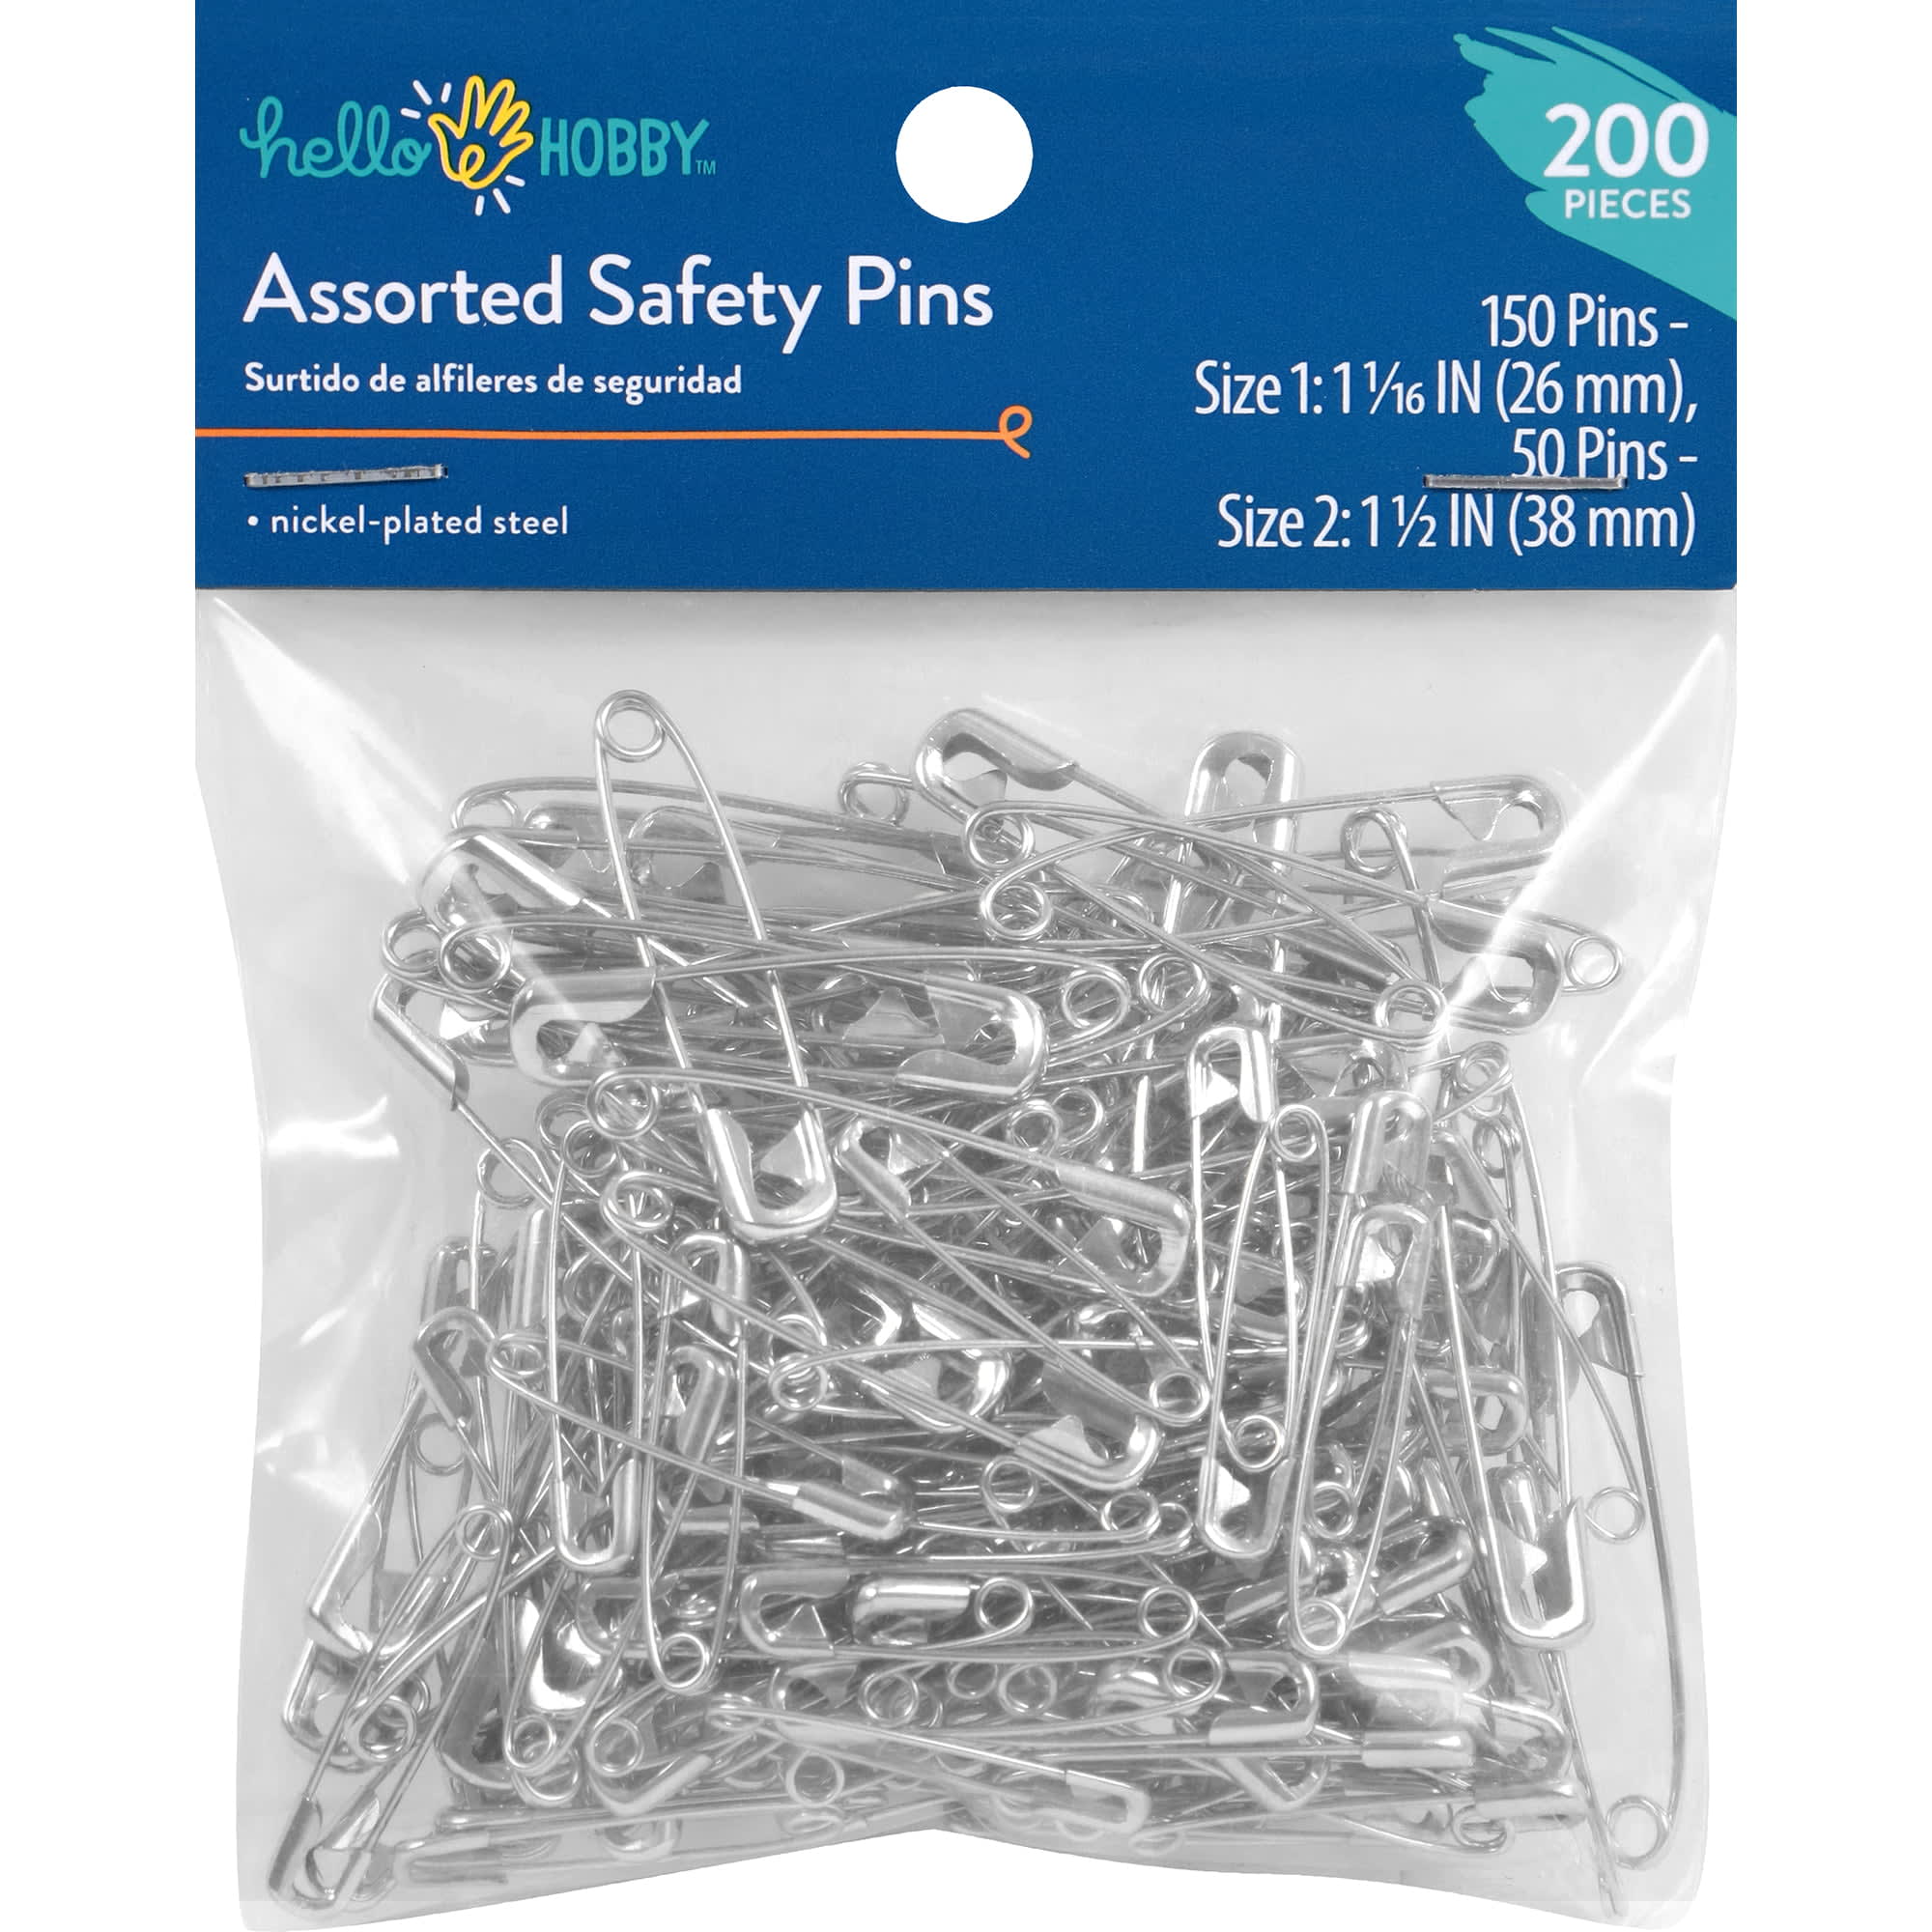 Hello Hobby Size 1 and 2 Assorted Safety Pins (200 Count) - DroneUp Delivery